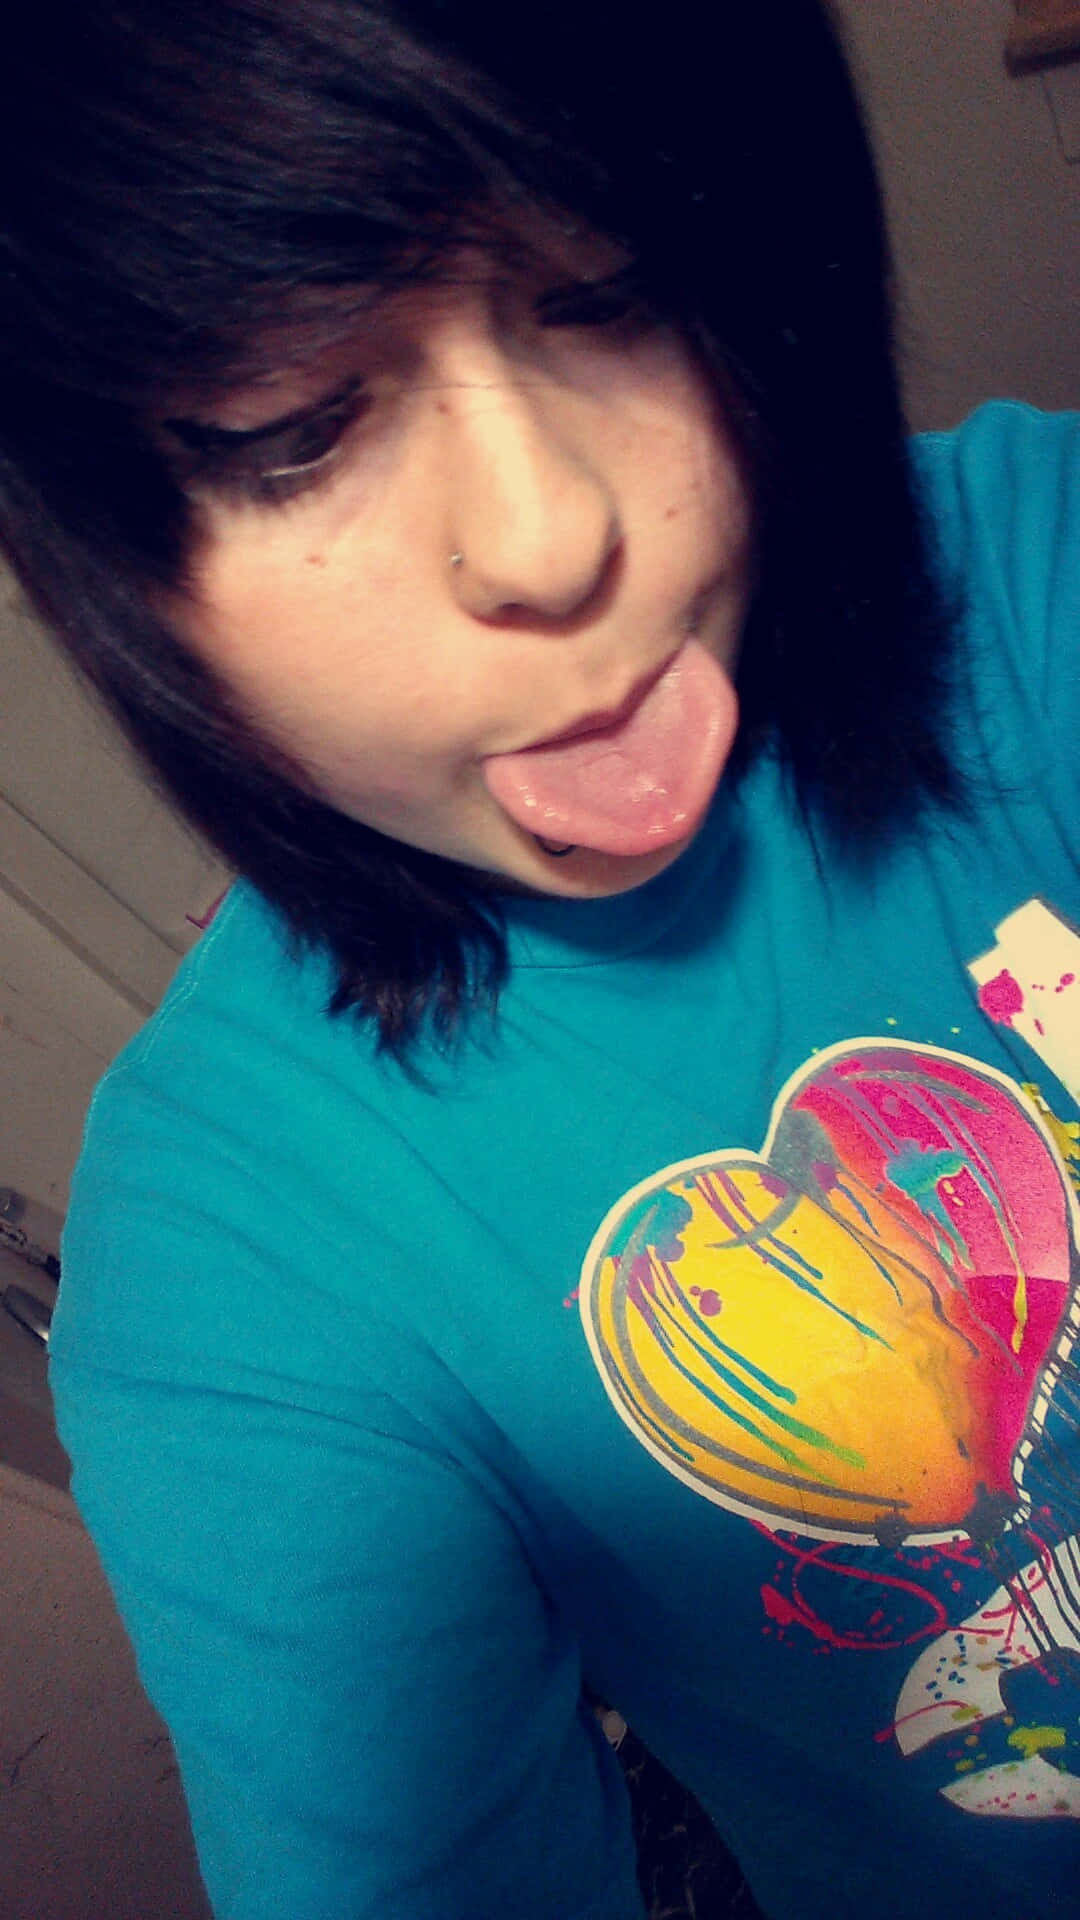 Emo Girl Sticking Out Tongue Wallpaper